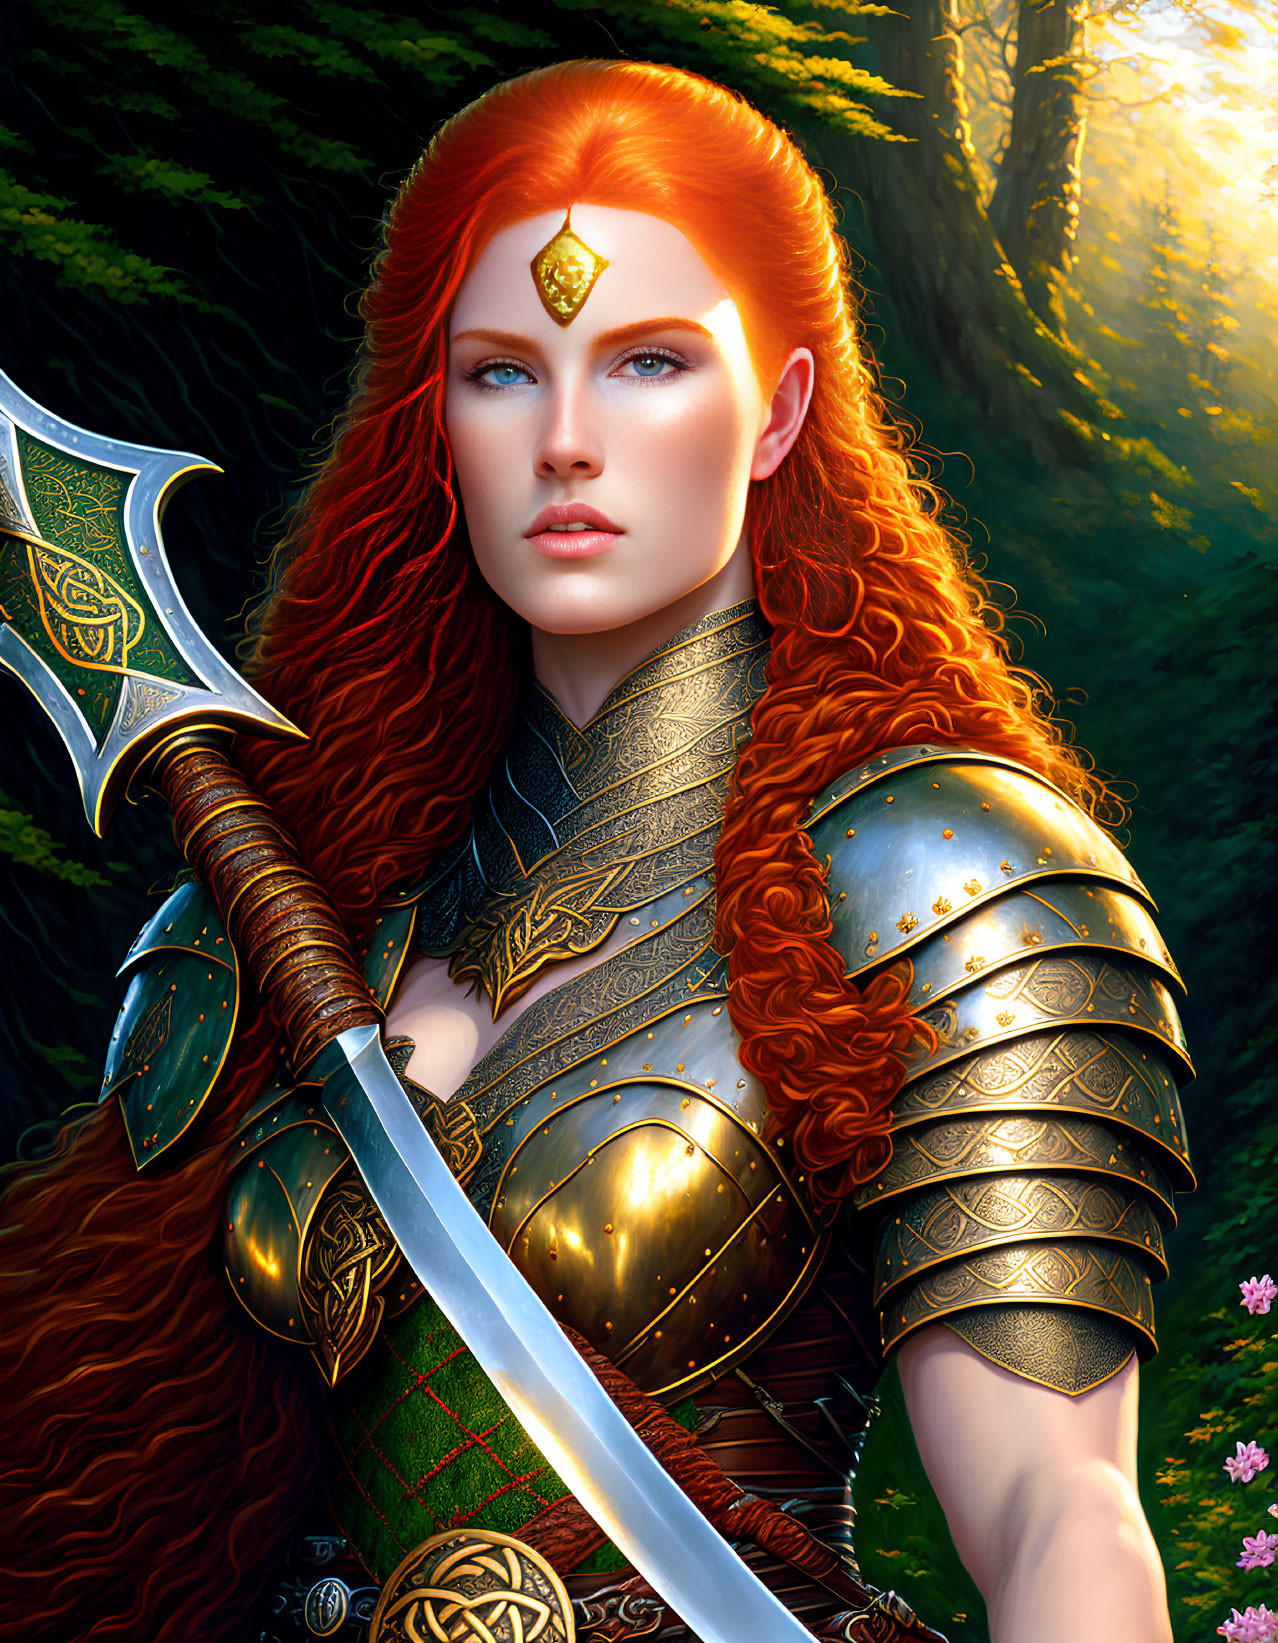 Red-Haired Warrior in Golden Armor with Axe and Sword in Sunlit Forest